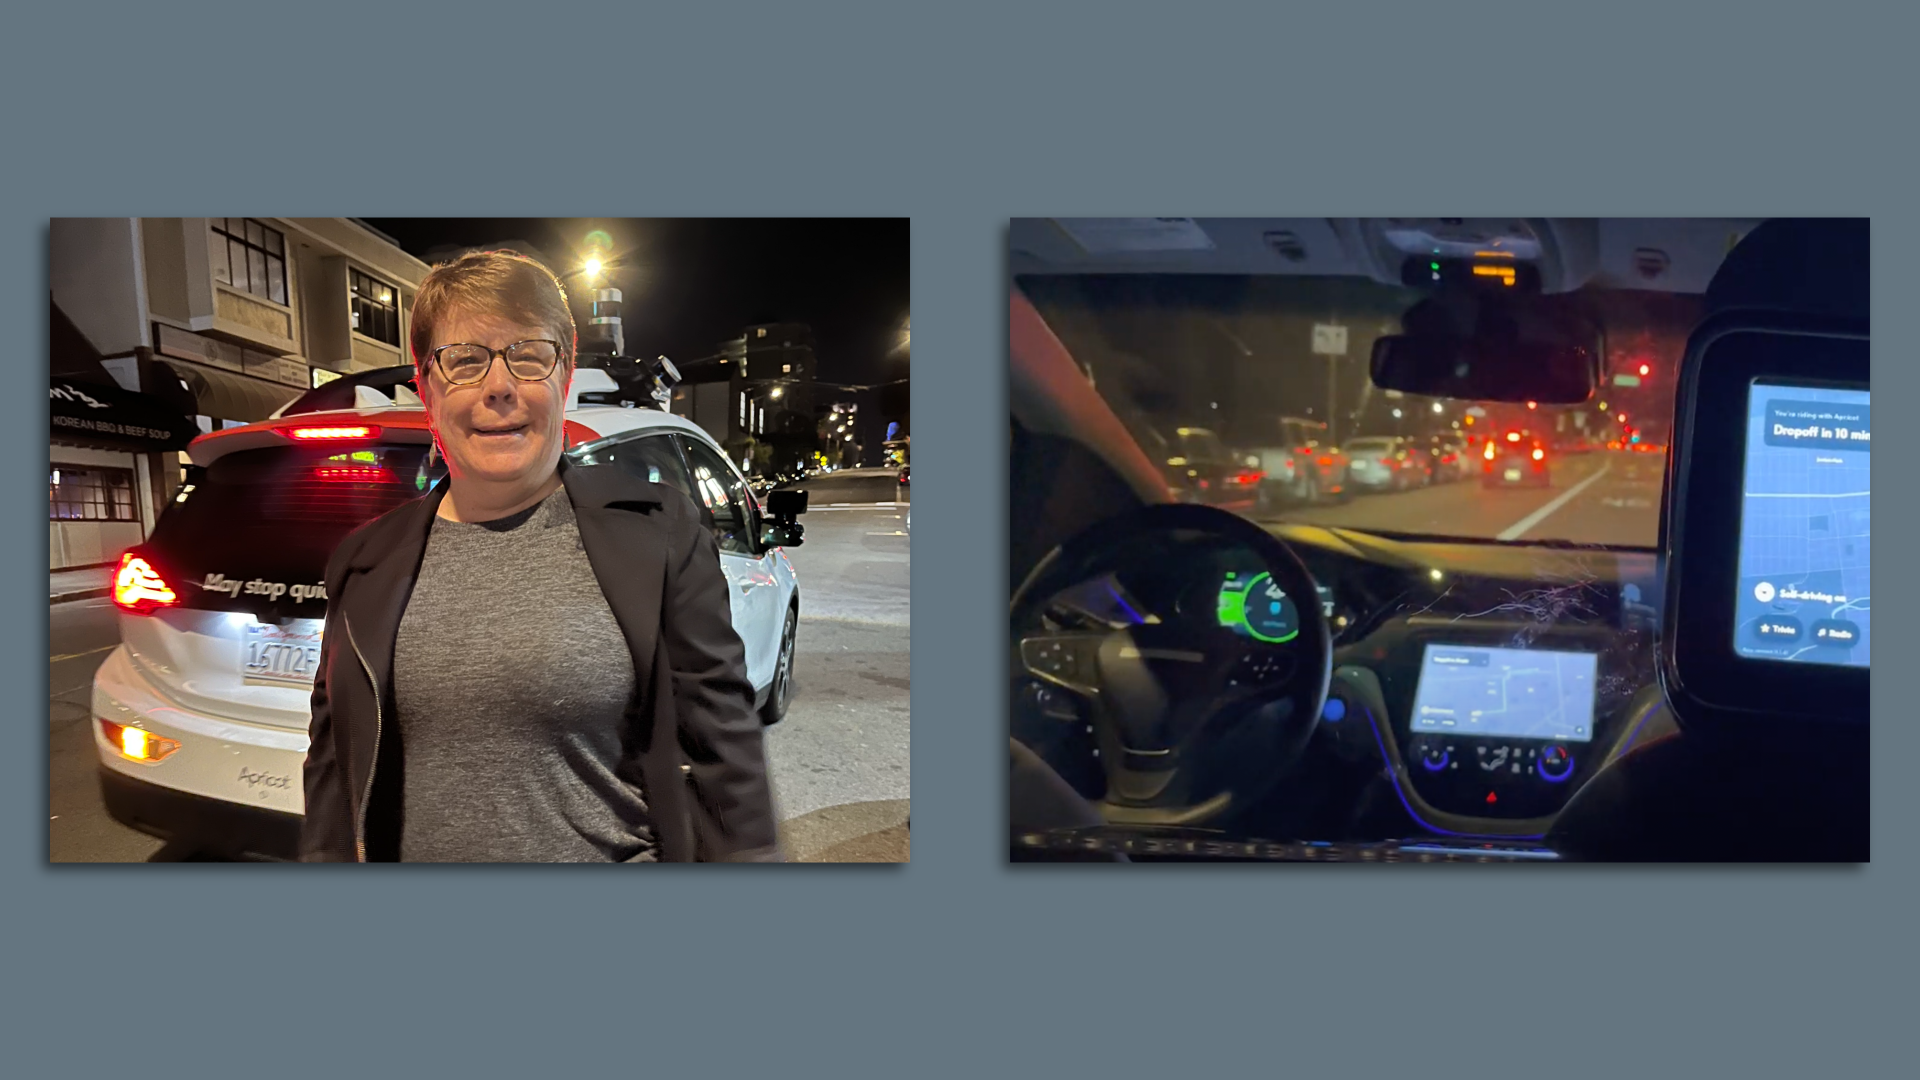 Side by side images of the author and her view from the back seat of a Cruise robotaxi